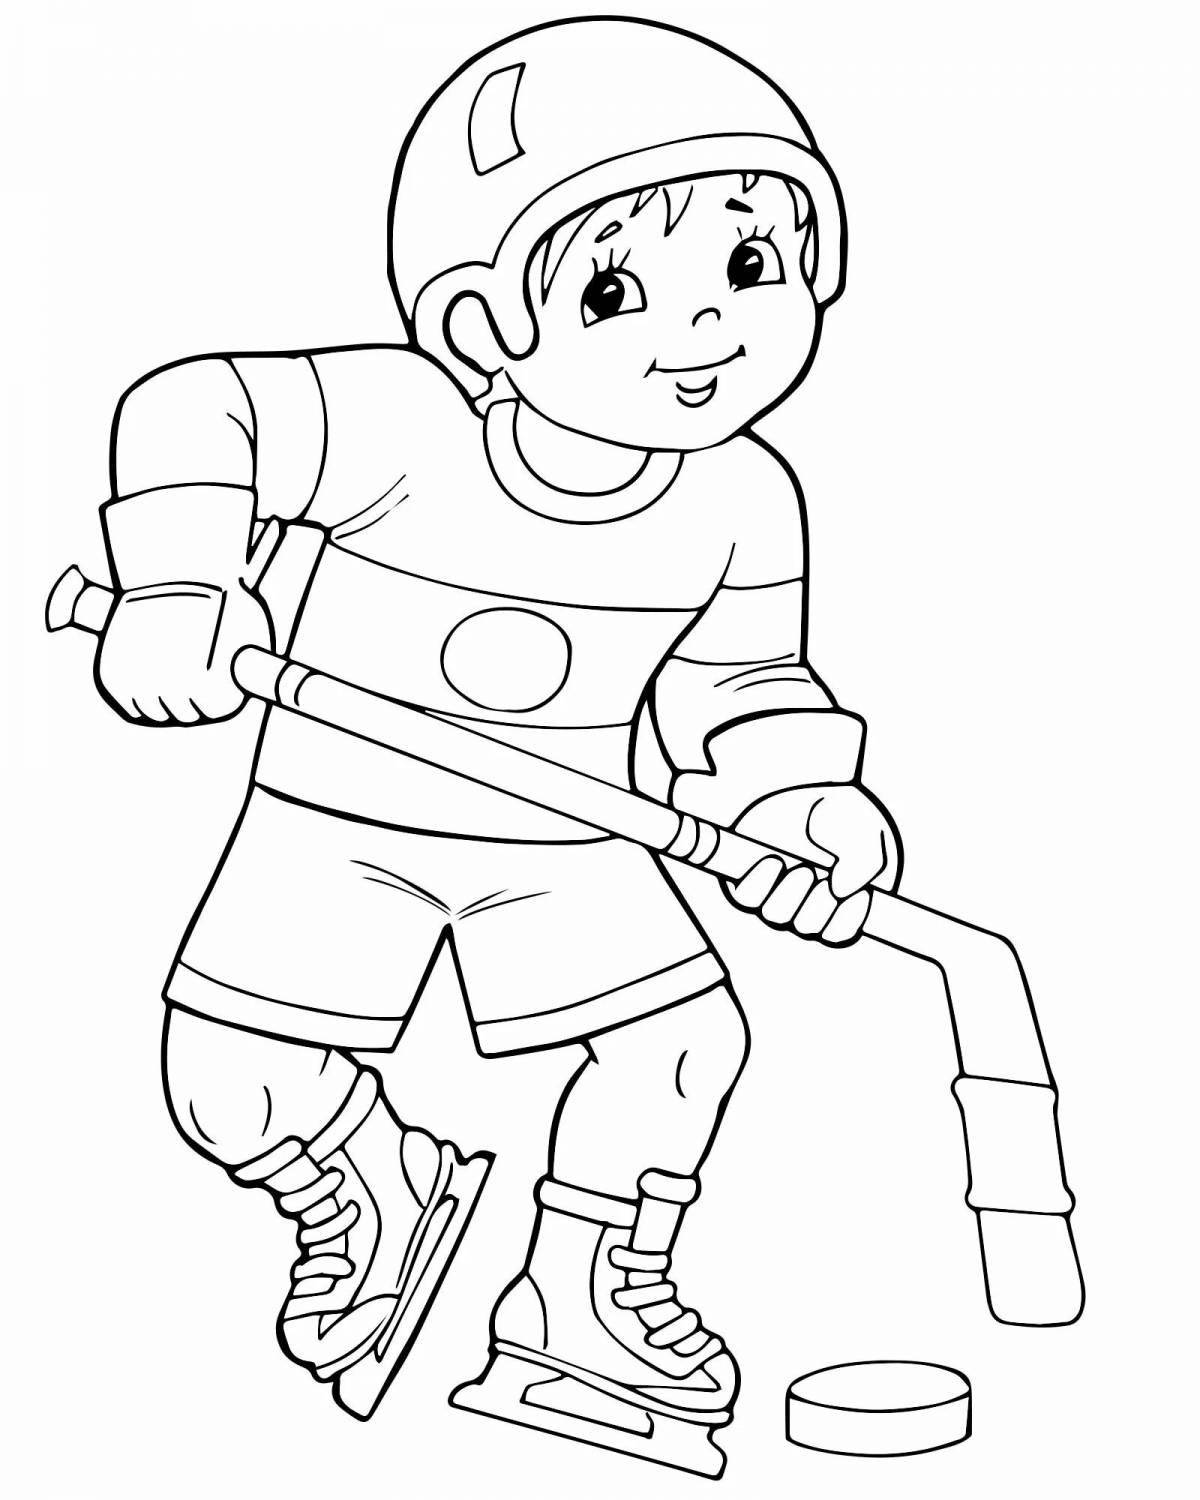 Colorful coloring book athletes of different sports for children